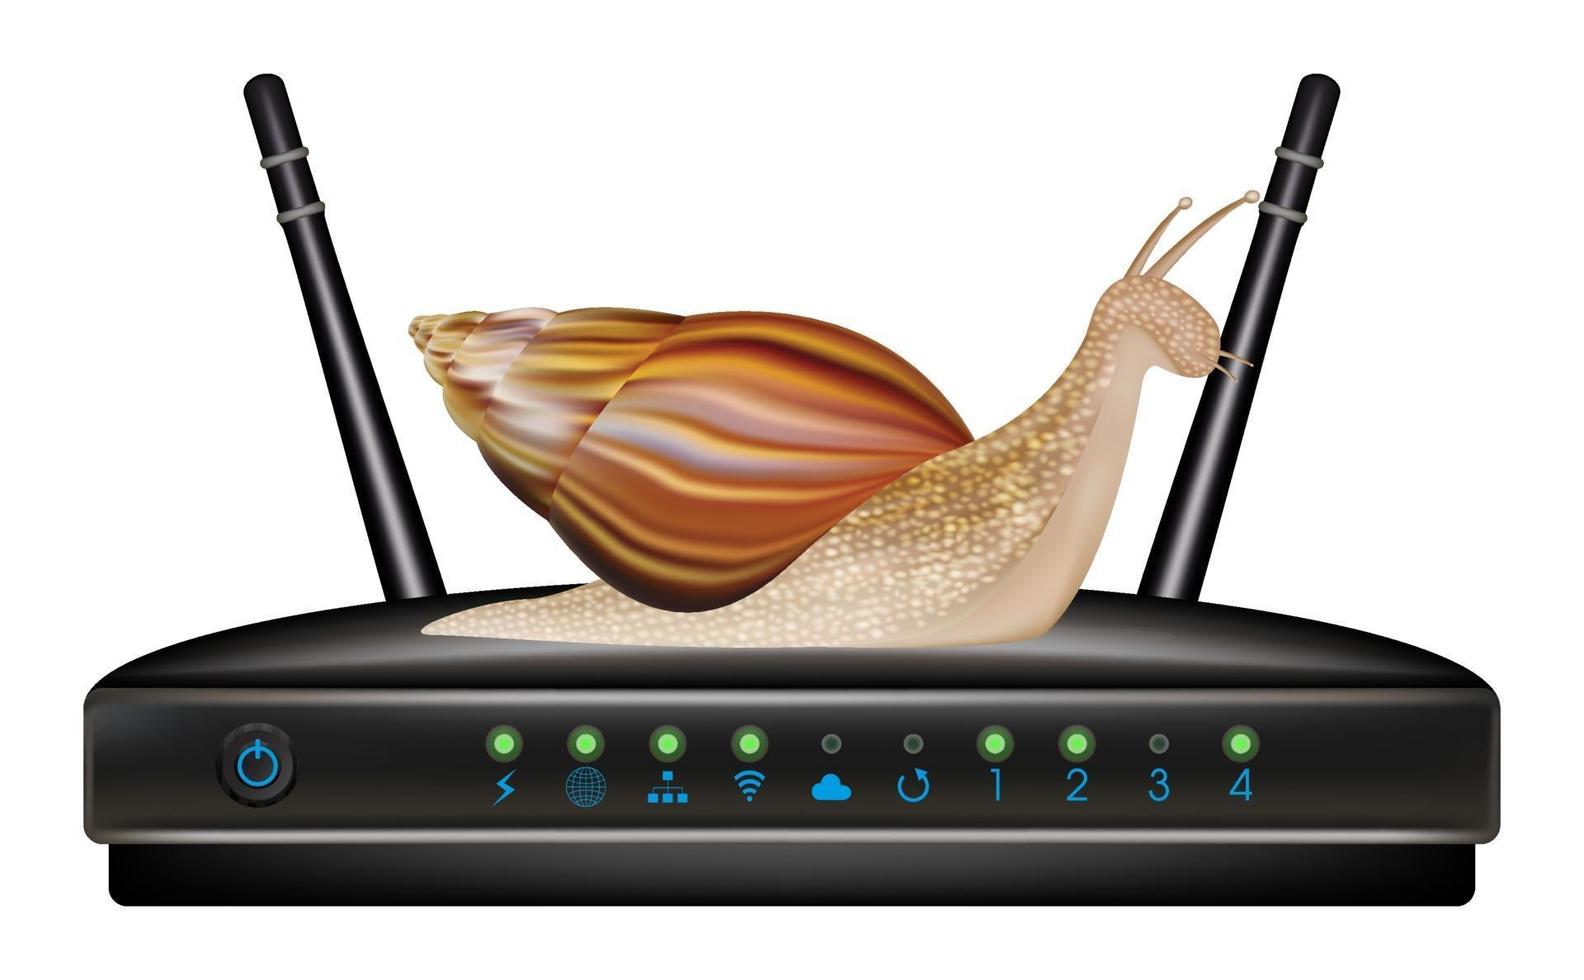 slow speed router with snail vector